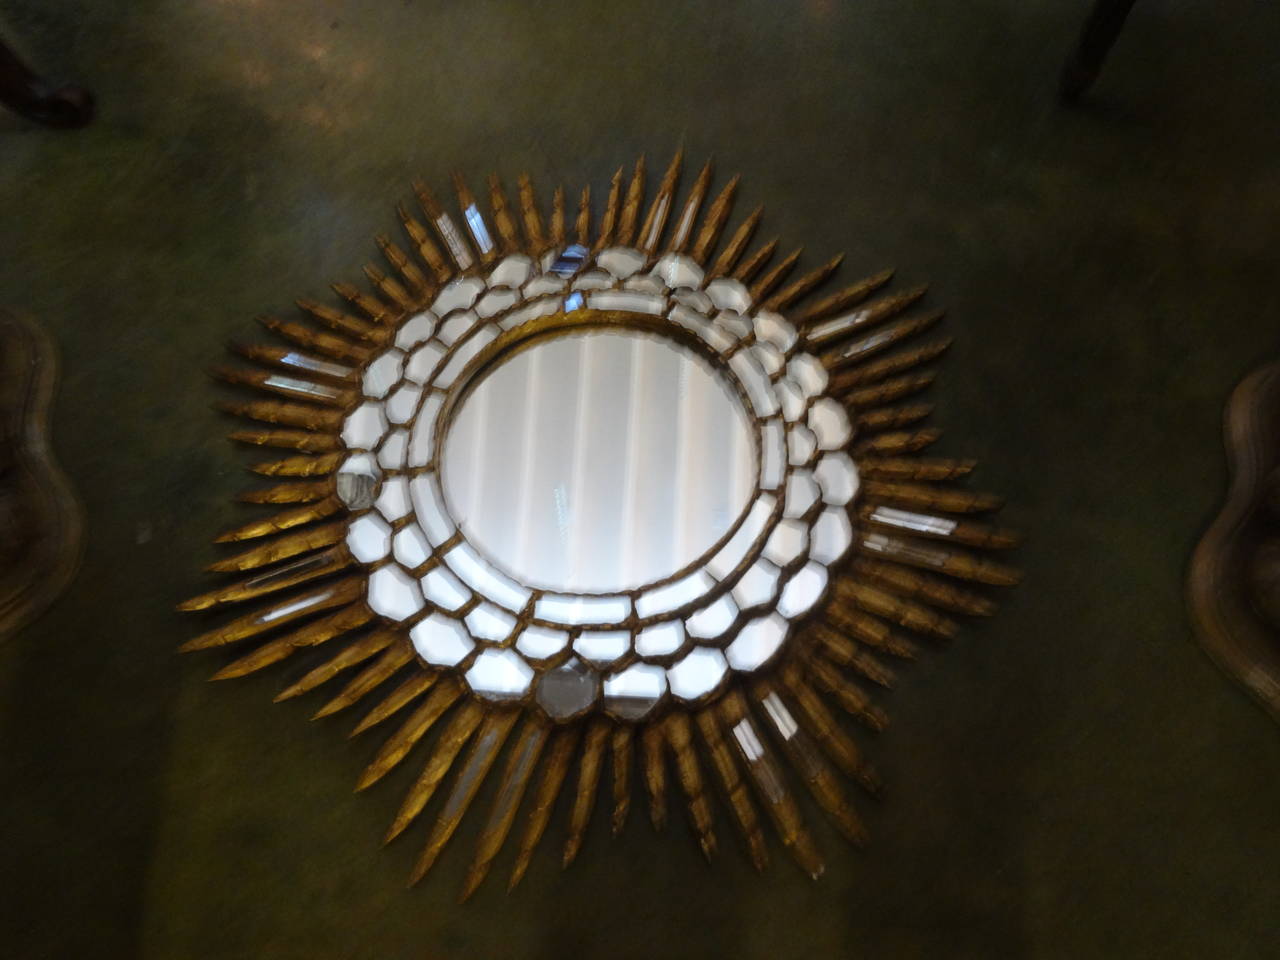 Chic Italian Gilt Wood Sunburst Mirror.

Please click KIRBY ANTIQUES logo below to view additional pieces from our vast inventory.